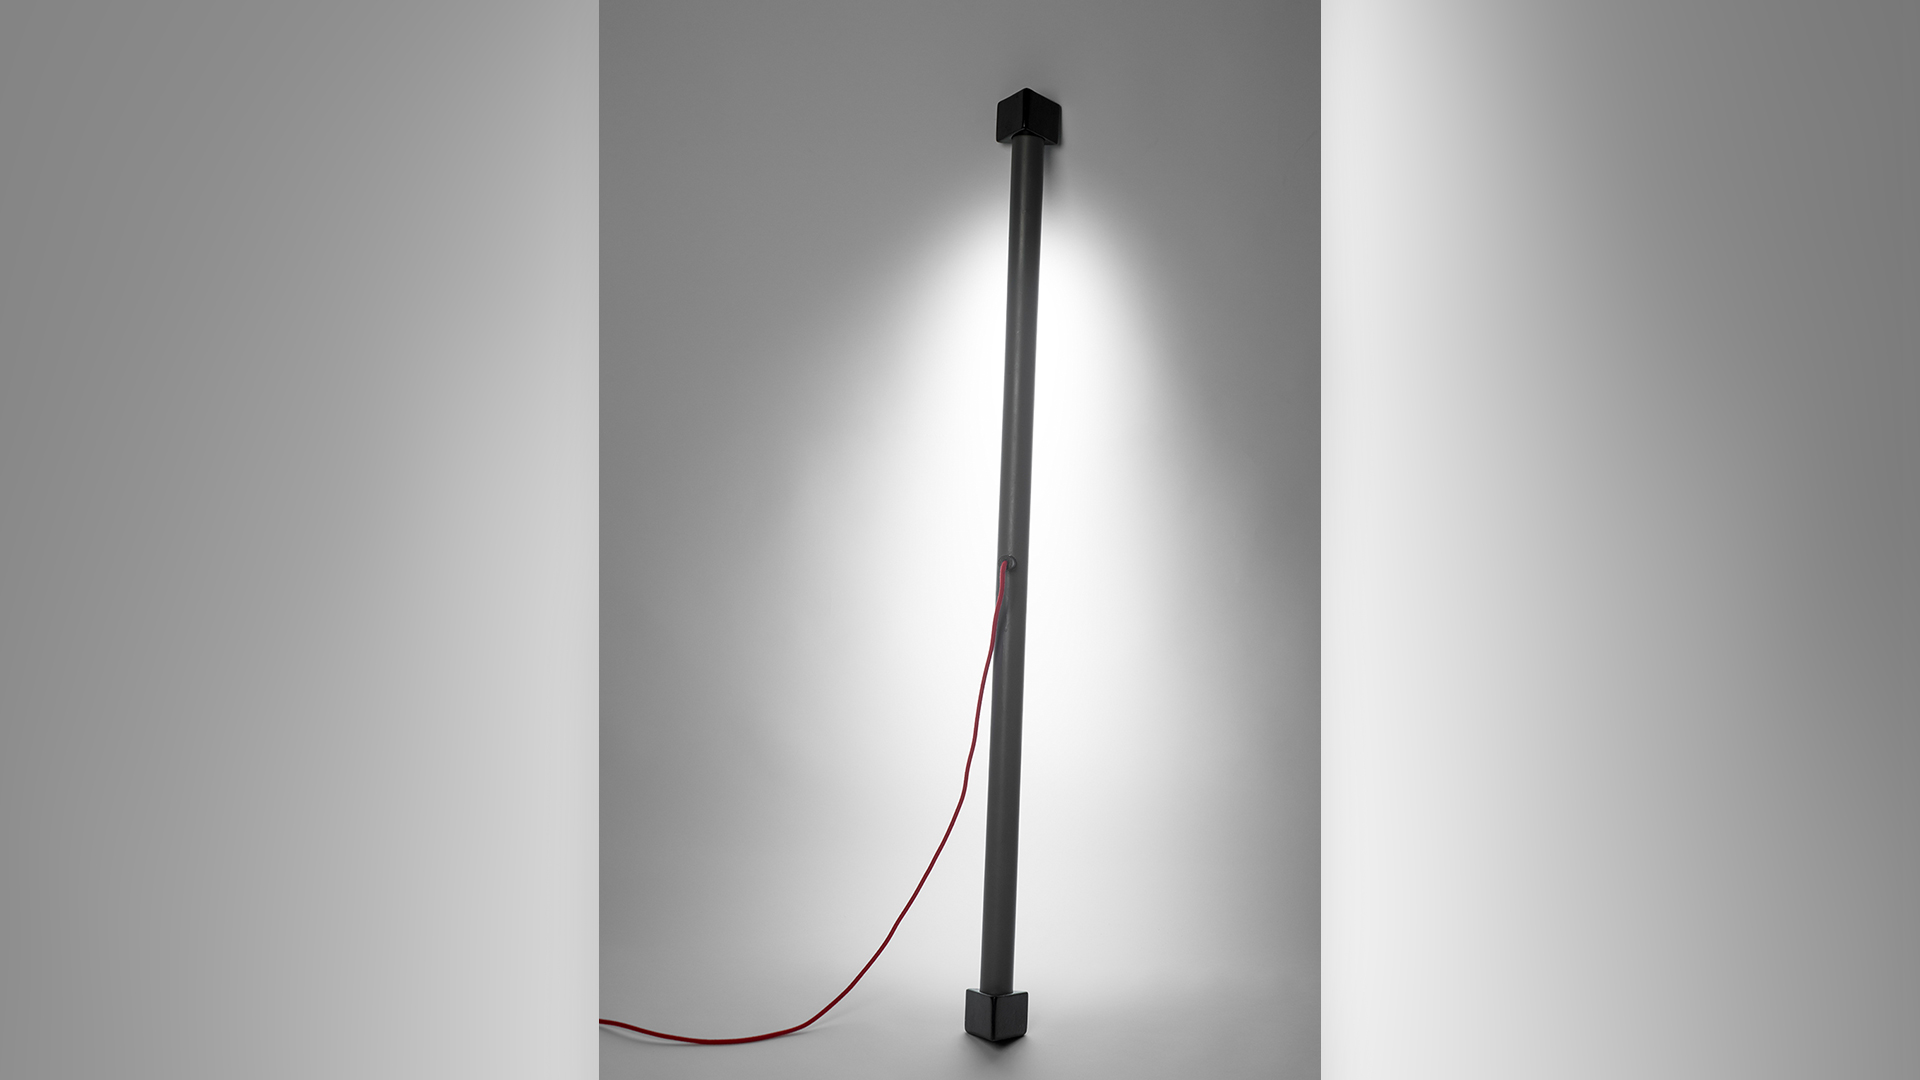 Vertical light with small space, light emanating from long lamp pole facing toward back wall